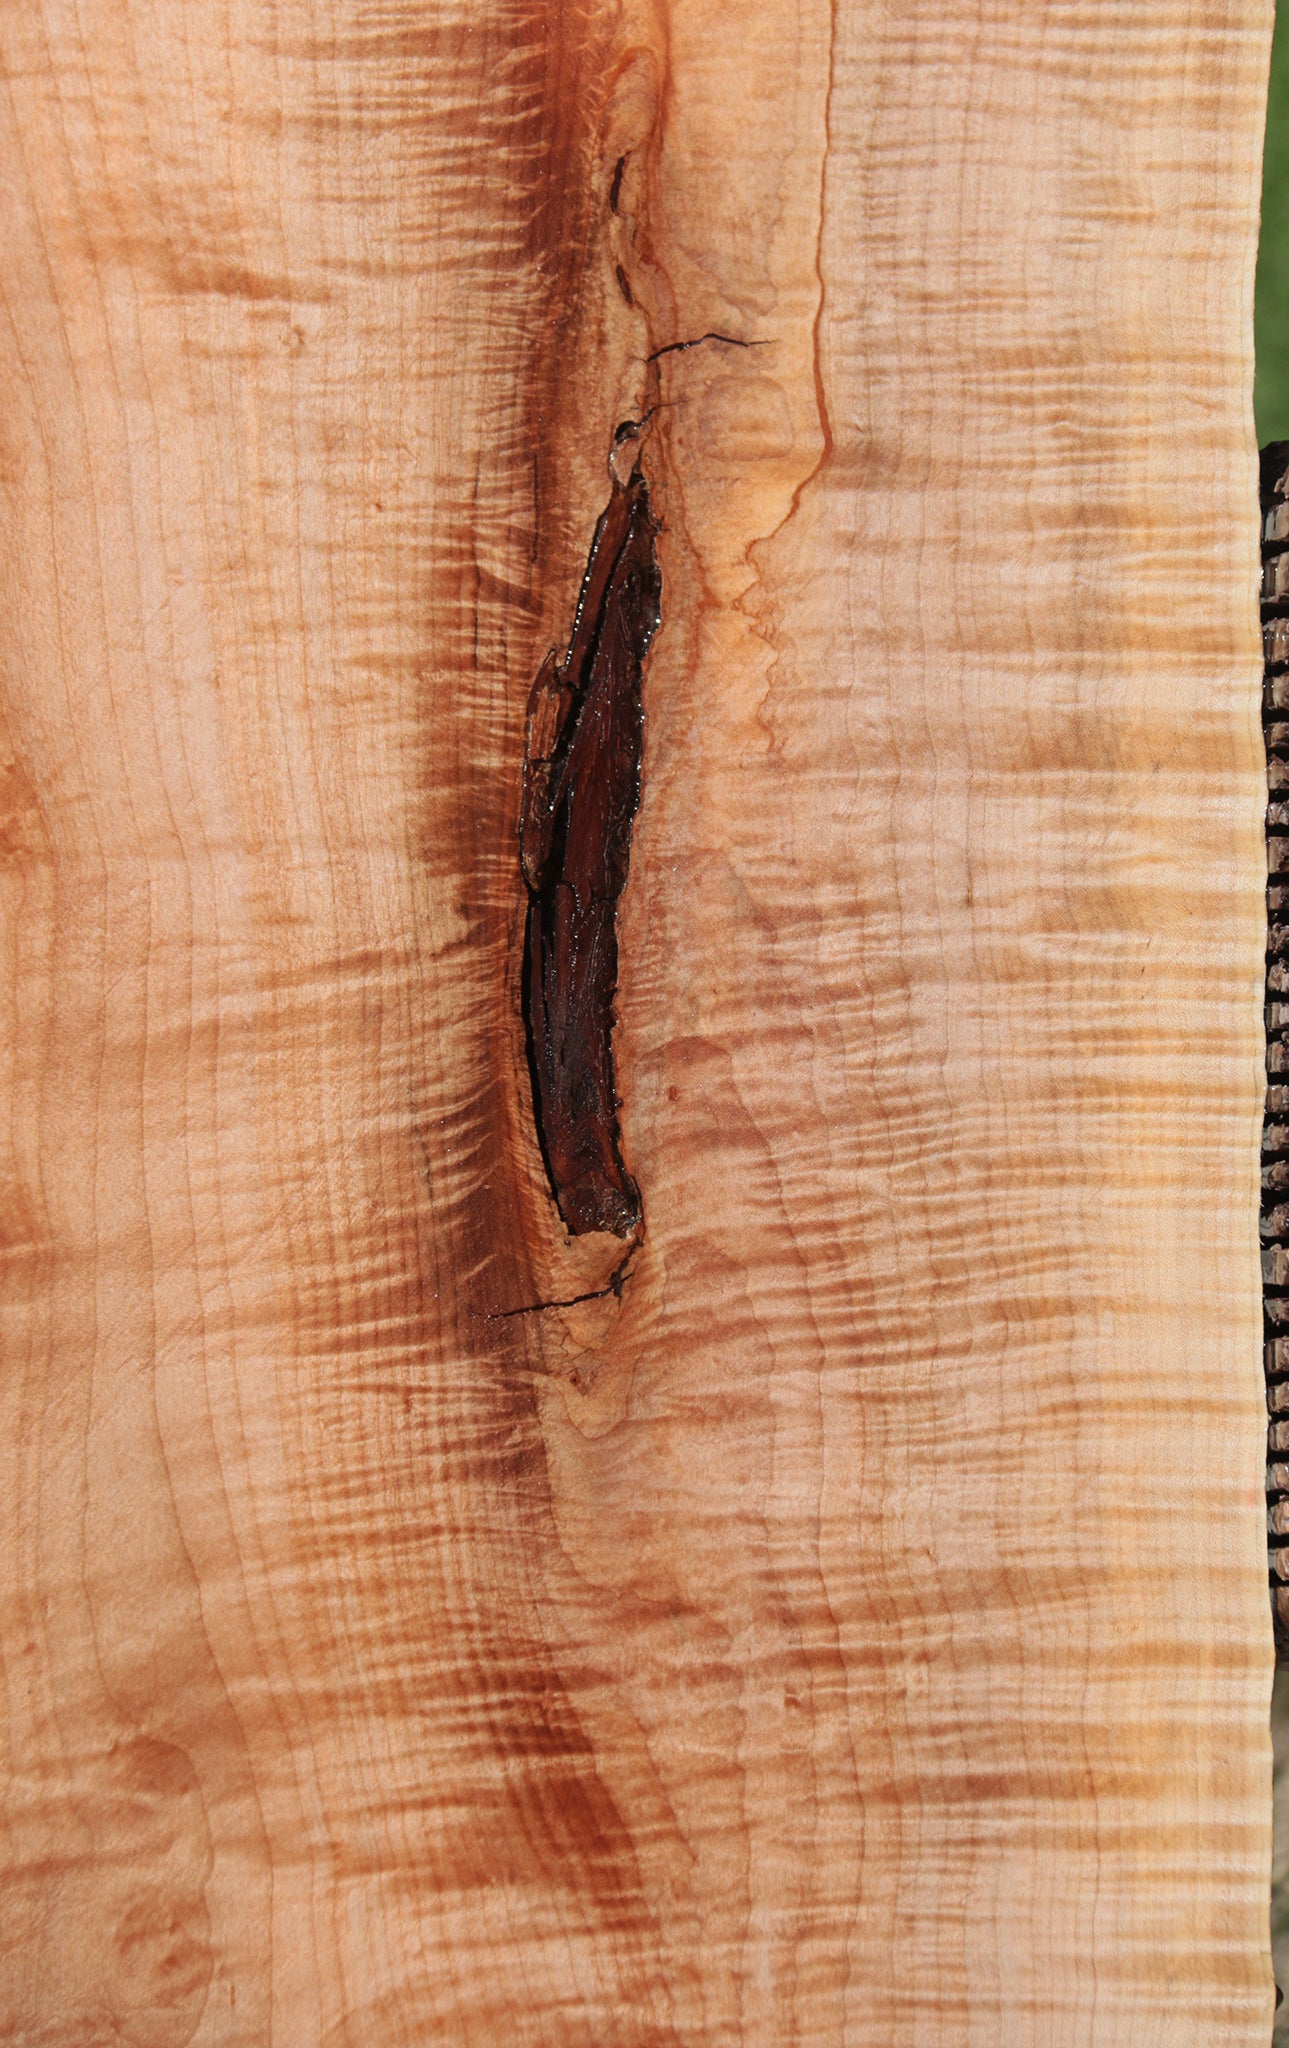 Extra Fancy Rustic Western Maple Live Edge Slab (Free Shipping Excluded)